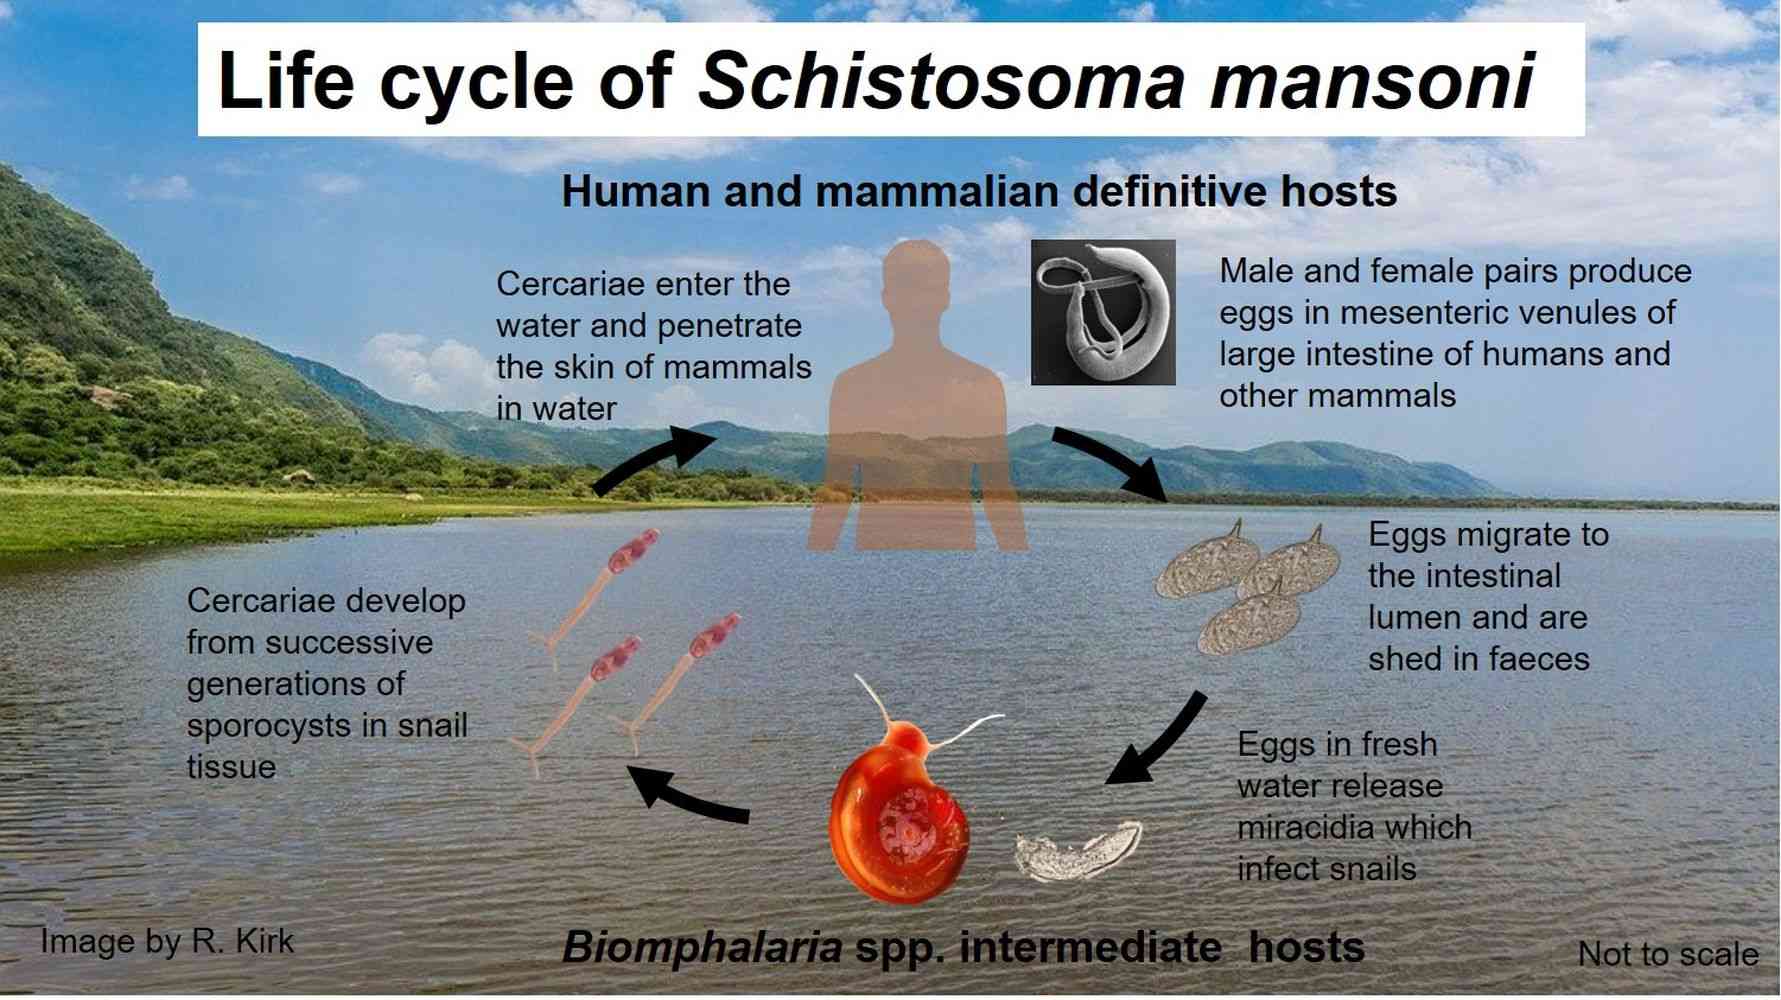 Life cycle of Schistosoma mansoni - an agent of human schistosomiasis - Human schistosomiasis is an acute and chronic disease that affects over 200 million people, prevalent in tropical and subtropical areas of the world.